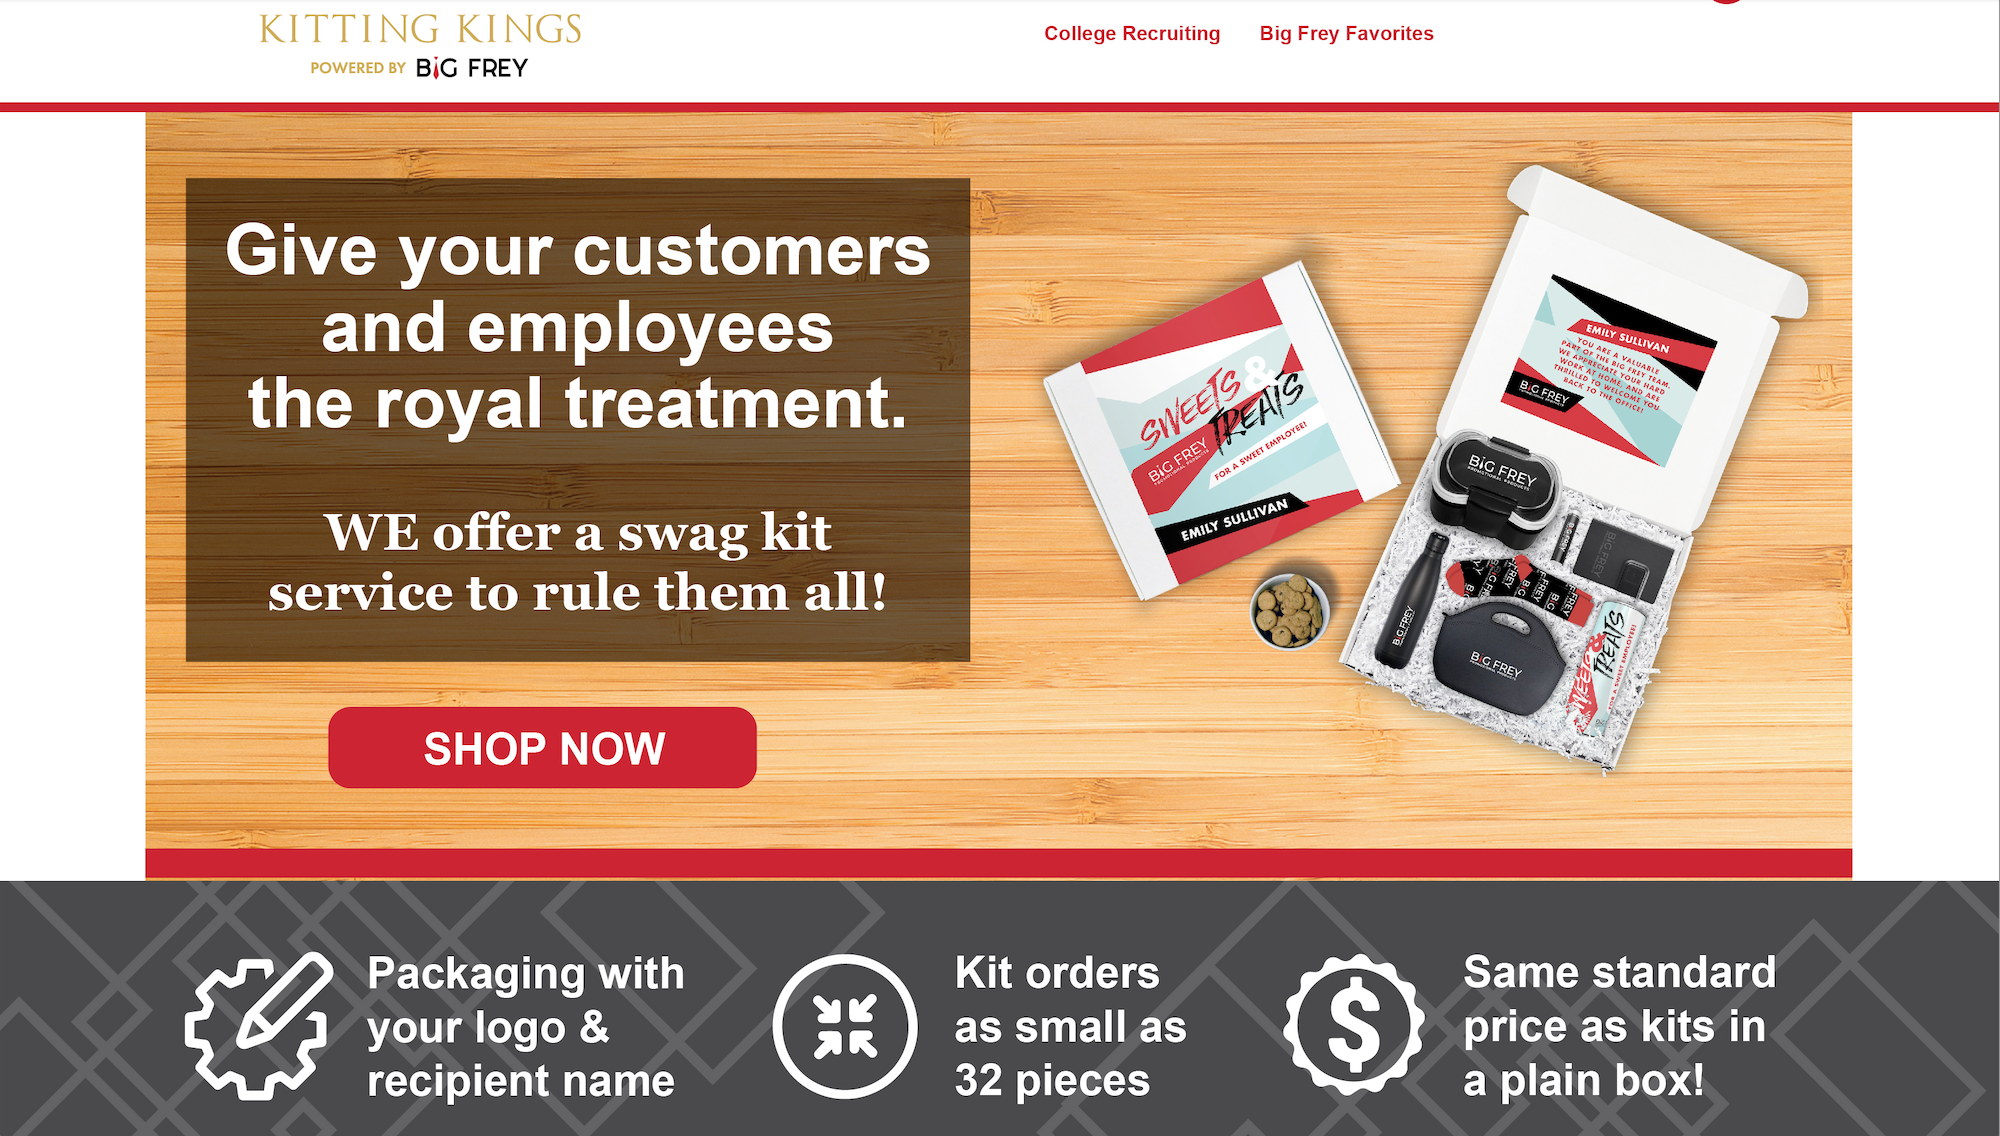 PNG image selection from the Kitting Kings sub-brand campaign landing page for Big Frey.